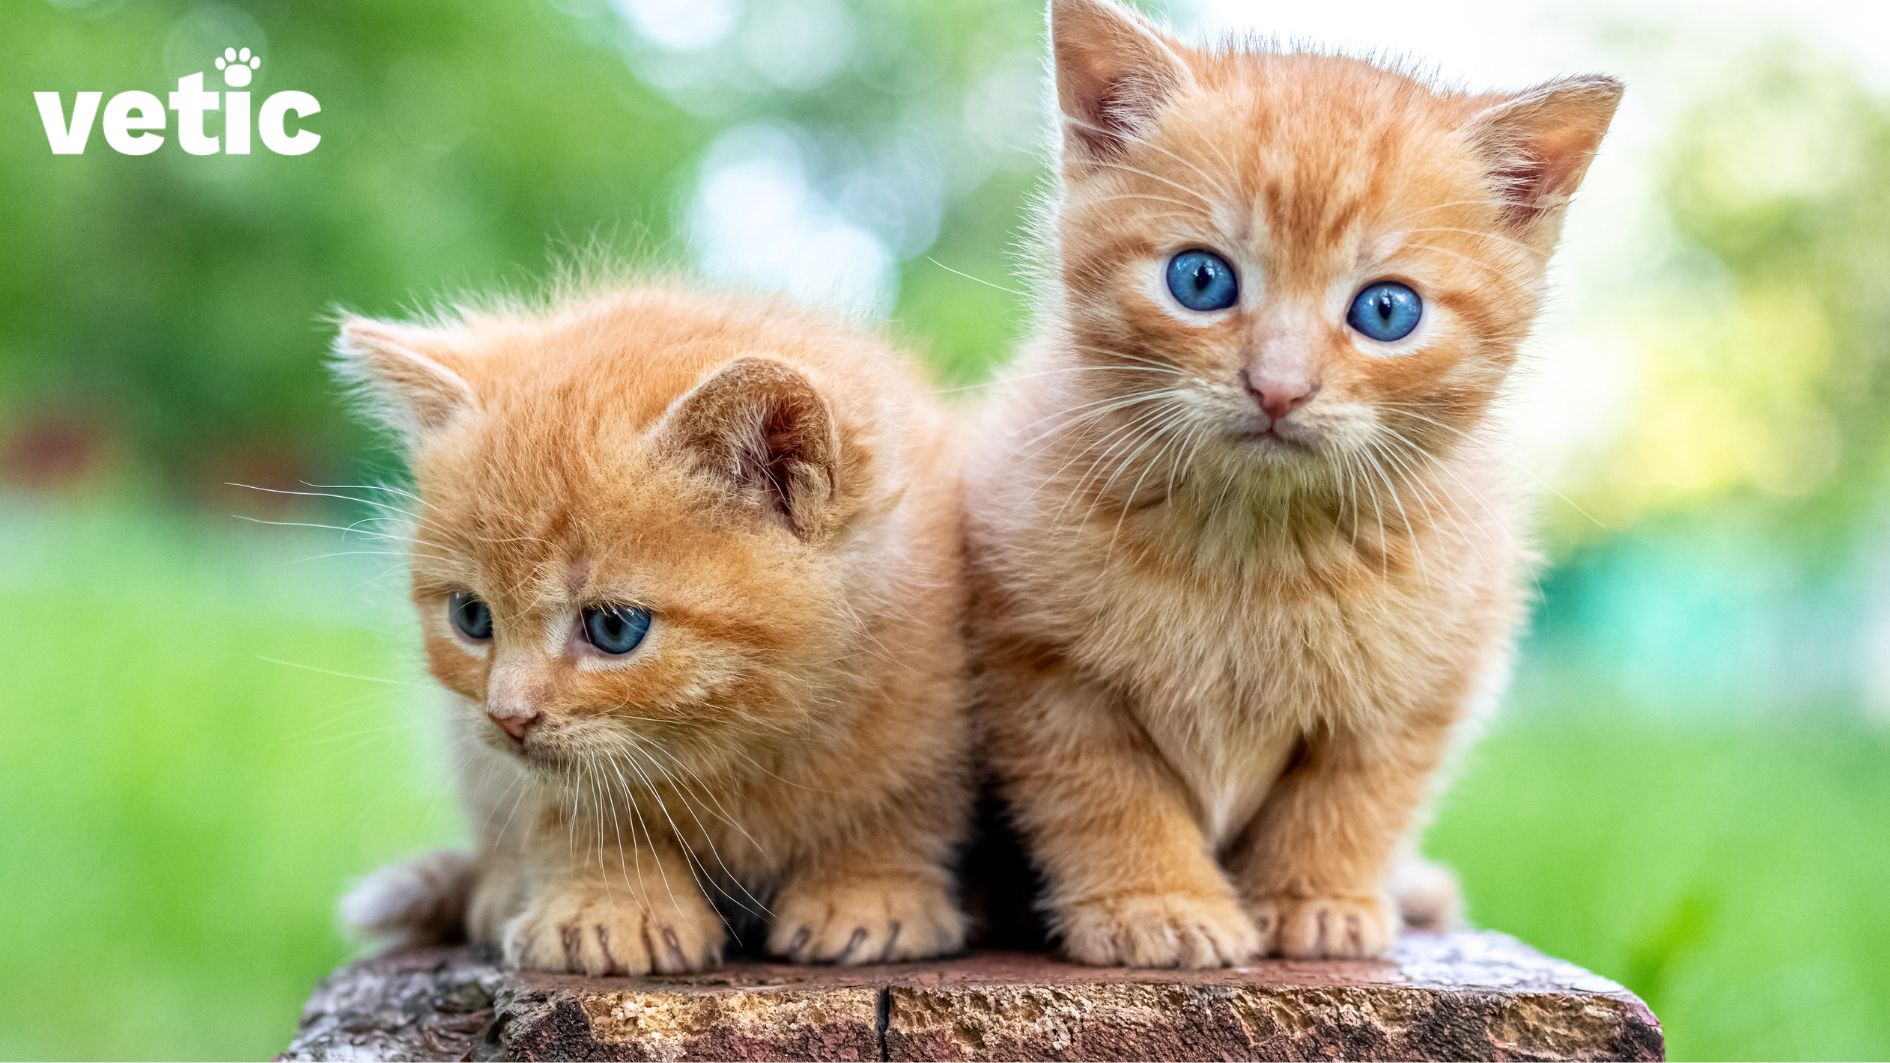 two ginger kittens sitting side by side on an elevated surface outdoor. green foliage is visible in the background. one kitten is sitting flat and looking away from the camera. the kitten to the right is sitting up almost straight and looking right at the camera. both have blue eyes, but straight open ears. They seem to be older than 28 days, but younger than 40 days.